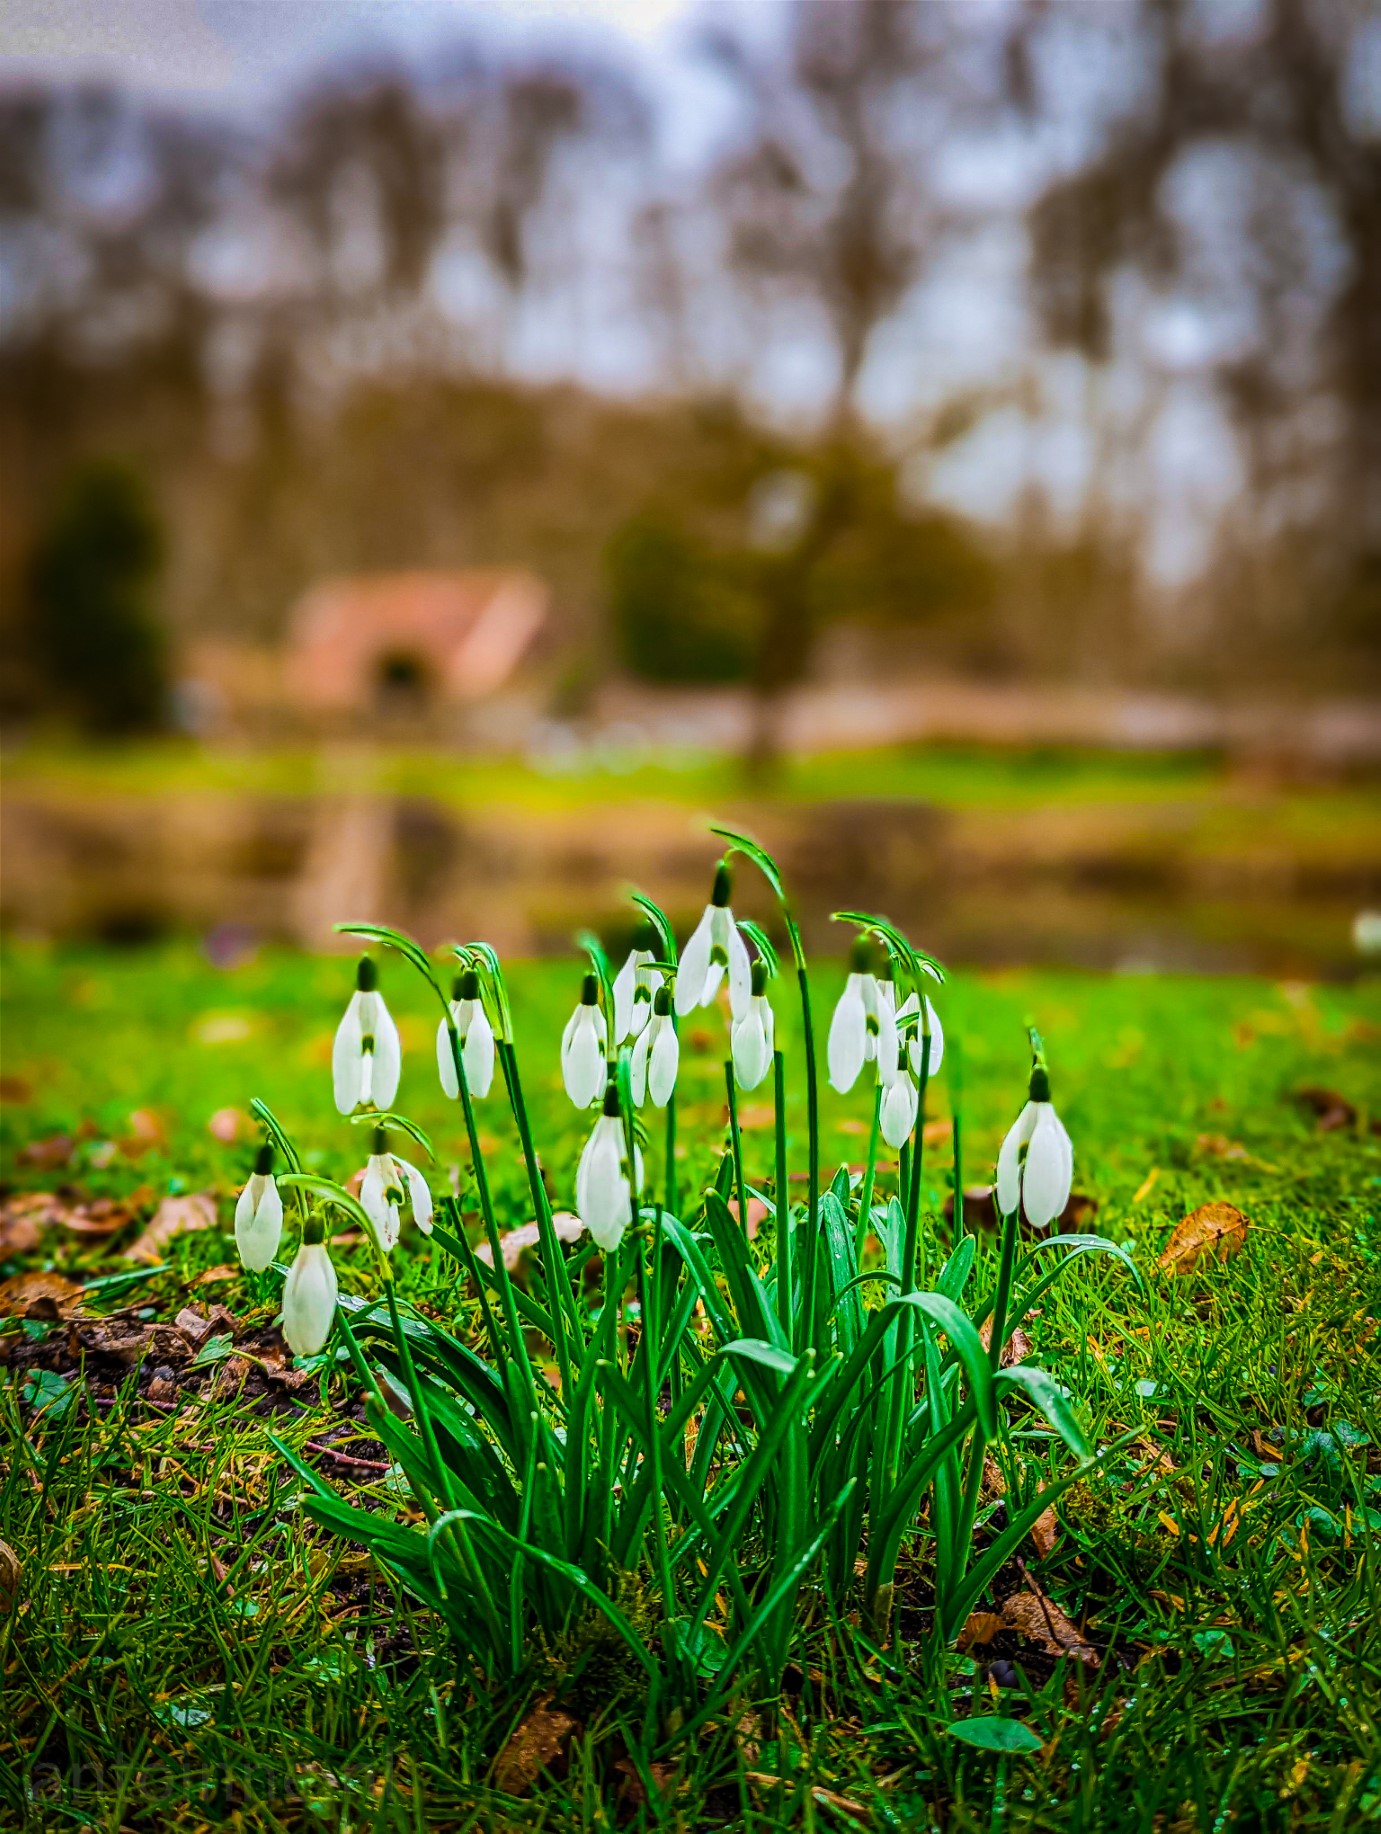 Snowdrops. A picture of snowdrops in front of a pond. The ornamental garden at country estate Gooilust is a beautiful walled garden with more than 900 species of exotic trees, shrubs and plants.